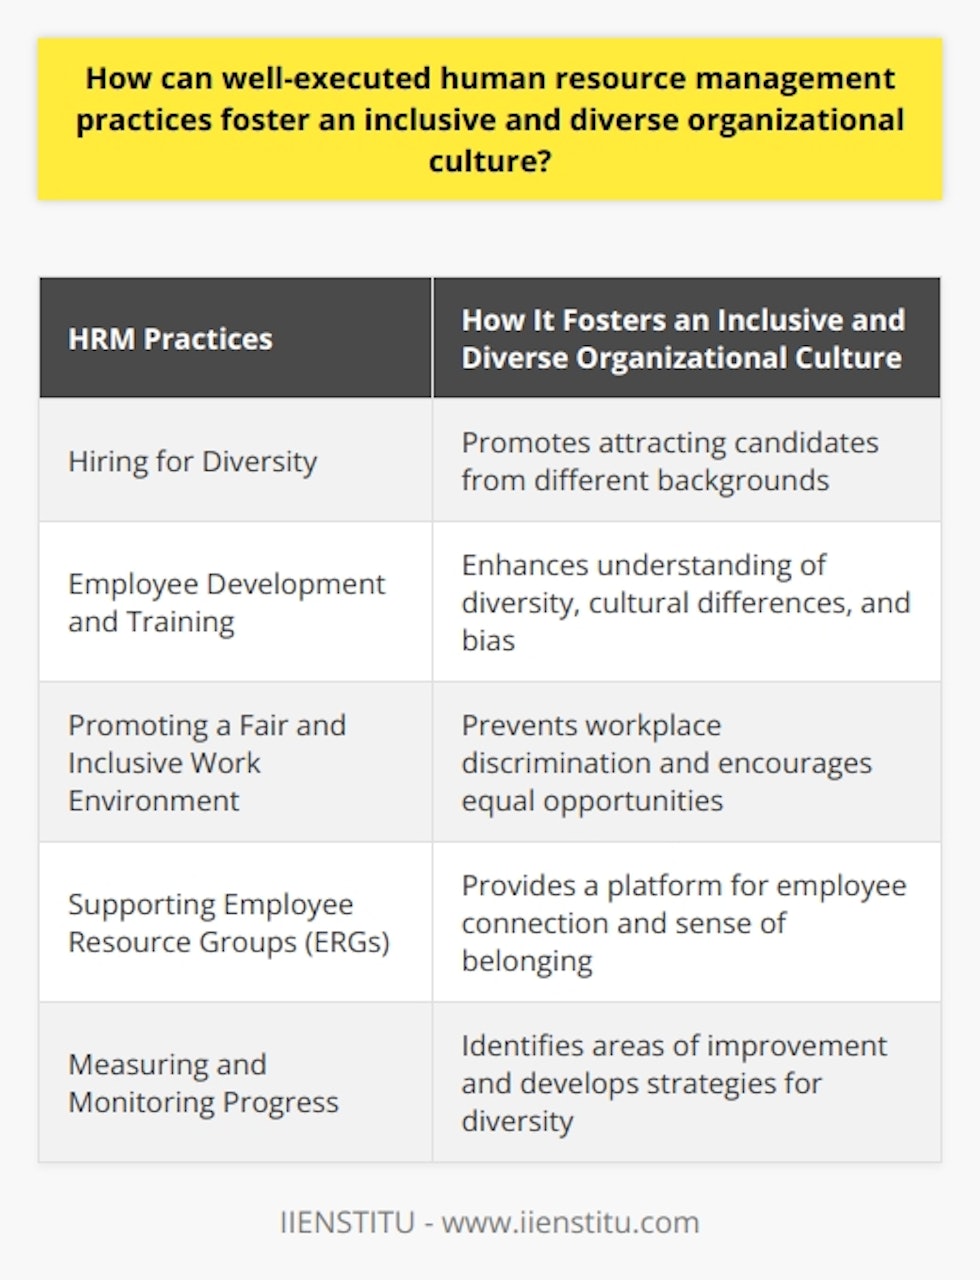 Establishing inclusive and diverse organizational cultures is crucial for organizations in today's globalized and diverse world. It not only enhances the organization's reputation but also improves employee satisfaction and productivity. Well-executed human resource management (HRM) practices can greatly contribute to creating such cultures. Here are some ways in which HRM practices can foster an inclusive and diverse organizational culture:1. Hiring for Diversity: HR professionals should develop recruitment strategies that promote diversity and inclusion. This can be done by implementing inclusive employment policies that focus on attracting candidates from different backgrounds. Using diverse language in job advertisements and reaching out to diverse communities and networks during the recruitment process can also help in attracting a wider range of candidates.2. Employee Development and Training: HR management practices should provide ongoing training and development opportunities to employees. Such training should focus on enhancing employees' understanding of diversity, cultural differences, and unconscious bias. By equipping the workforce with the necessary knowledge and skills, organizations can foster inclusive mindsets and promote effective collaboration in diverse environments.3. Promoting a Fair and Inclusive Work Environment: HR professionals should implement policies that prevent workplace discrimination and encourage equal opportunities for all employees. Non-discrimination policies, transparent promotion and compensation systems, and alternative dispute resolution mechanisms can help create a fair and inclusive work environment. This can contribute to creating a sense of belonging and fostering diversity and inclusion within the organization.4. Supporting Employee Resource Groups (ERGs): HR management practices can benefit from supporting the establishment and growth of ERGs. These are employee-led groups that focus on shared interests, experiences, or backgrounds and advocate for an inclusive work environment. By encouraging ERGs, organizations provide a platform for employees to build connections, share experiences, and develop a sense of belonging. This further promotes diversity and inclusion within the organization.5. Measuring and Monitoring Progress: It is essential to measure and monitor the progress of diversity and inclusion initiatives to ensure their effectiveness. HR professionals should regularly track and analyze key performance indicators related to the diversity of the workforce, employee engagement, and overall organizational culture. This allows organizations to identify areas of improvement and develop strategies to address any gaps.In conclusion, well-executed HRM practices are crucial for fostering an inclusive and diverse organizational culture. By developing inclusive recruitment strategies, providing employee training, promoting a fair and inclusive work environment, supporting ERGs, and regularly measuring and monitoring progress, HR professionals can contribute significantly to creating inclusive and diverse organizational cultures. These practices not only benefit the organization but also instill a sense of belonging and satisfaction among employees, leading to improved productivity and success.